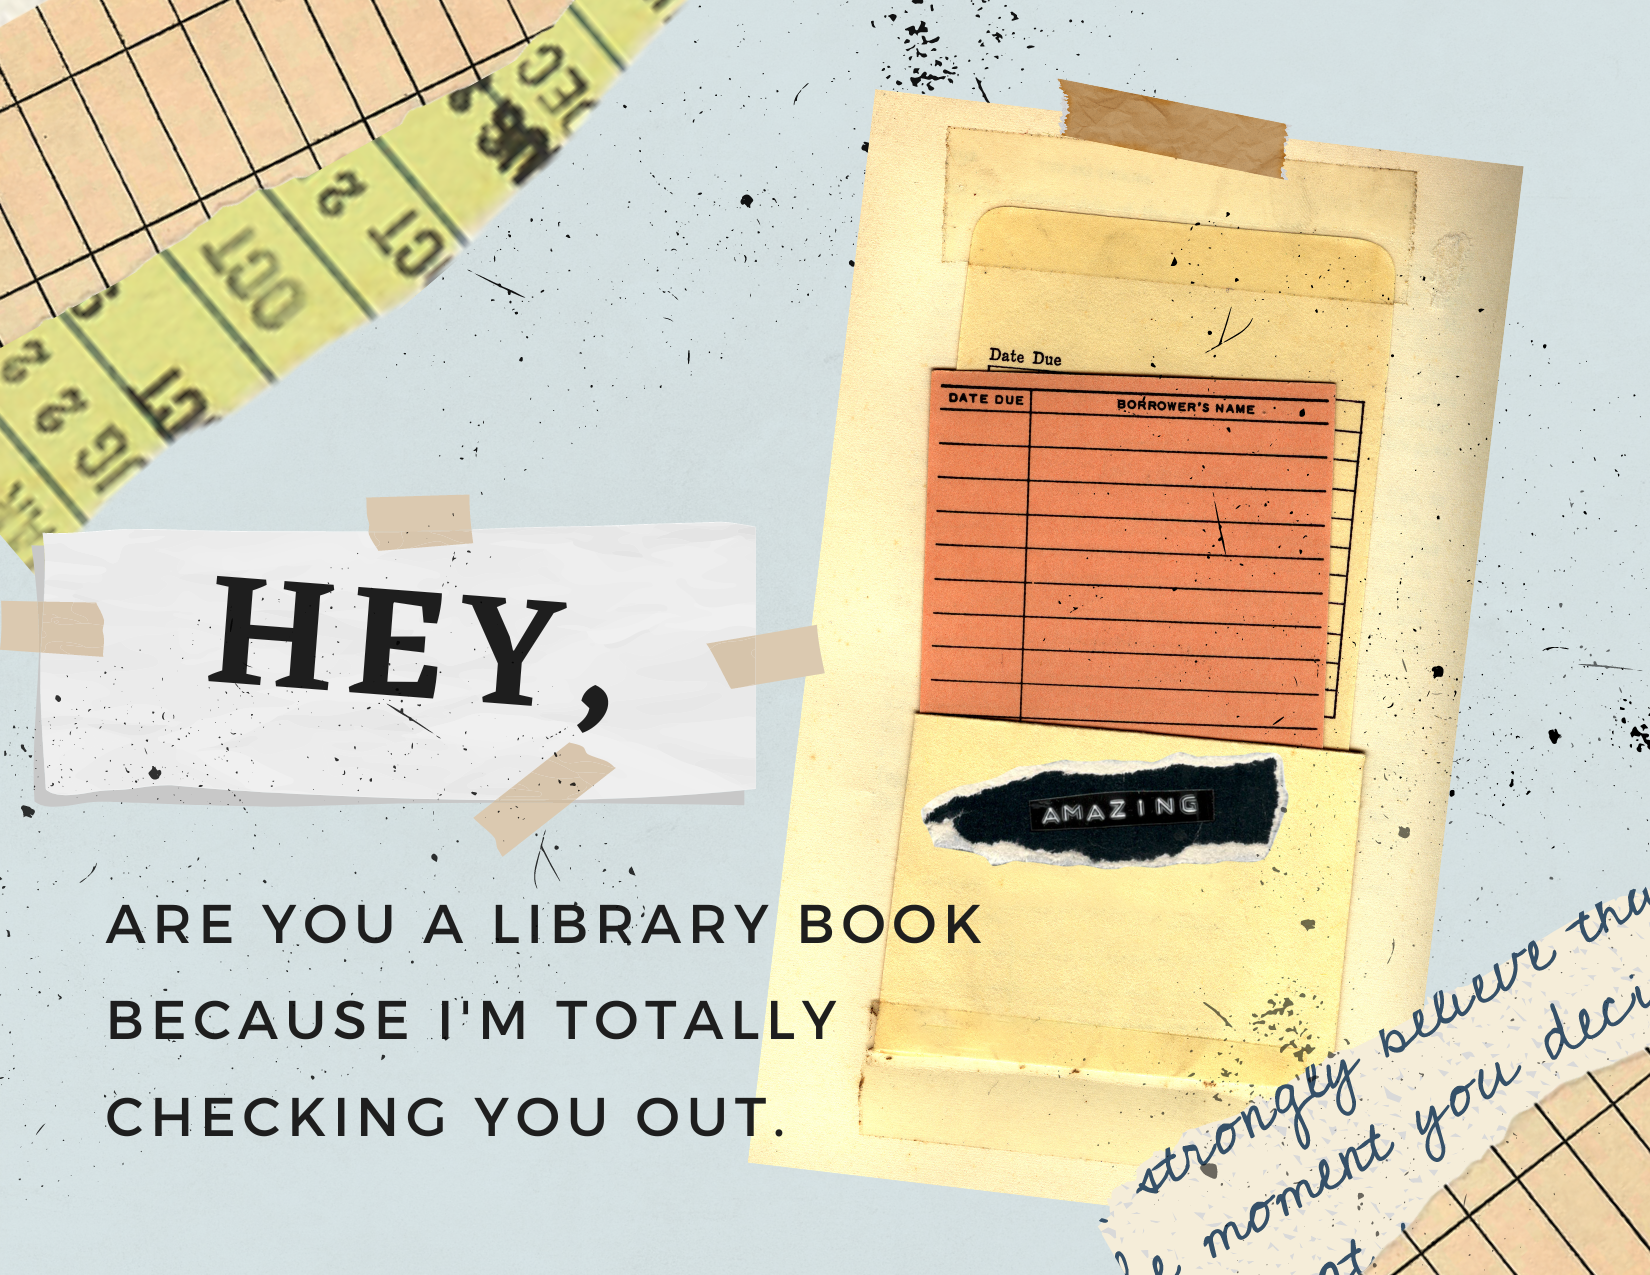 HEY, ARE YOU A LIBRARY BOOK-I'M CHECKING YOU OUT